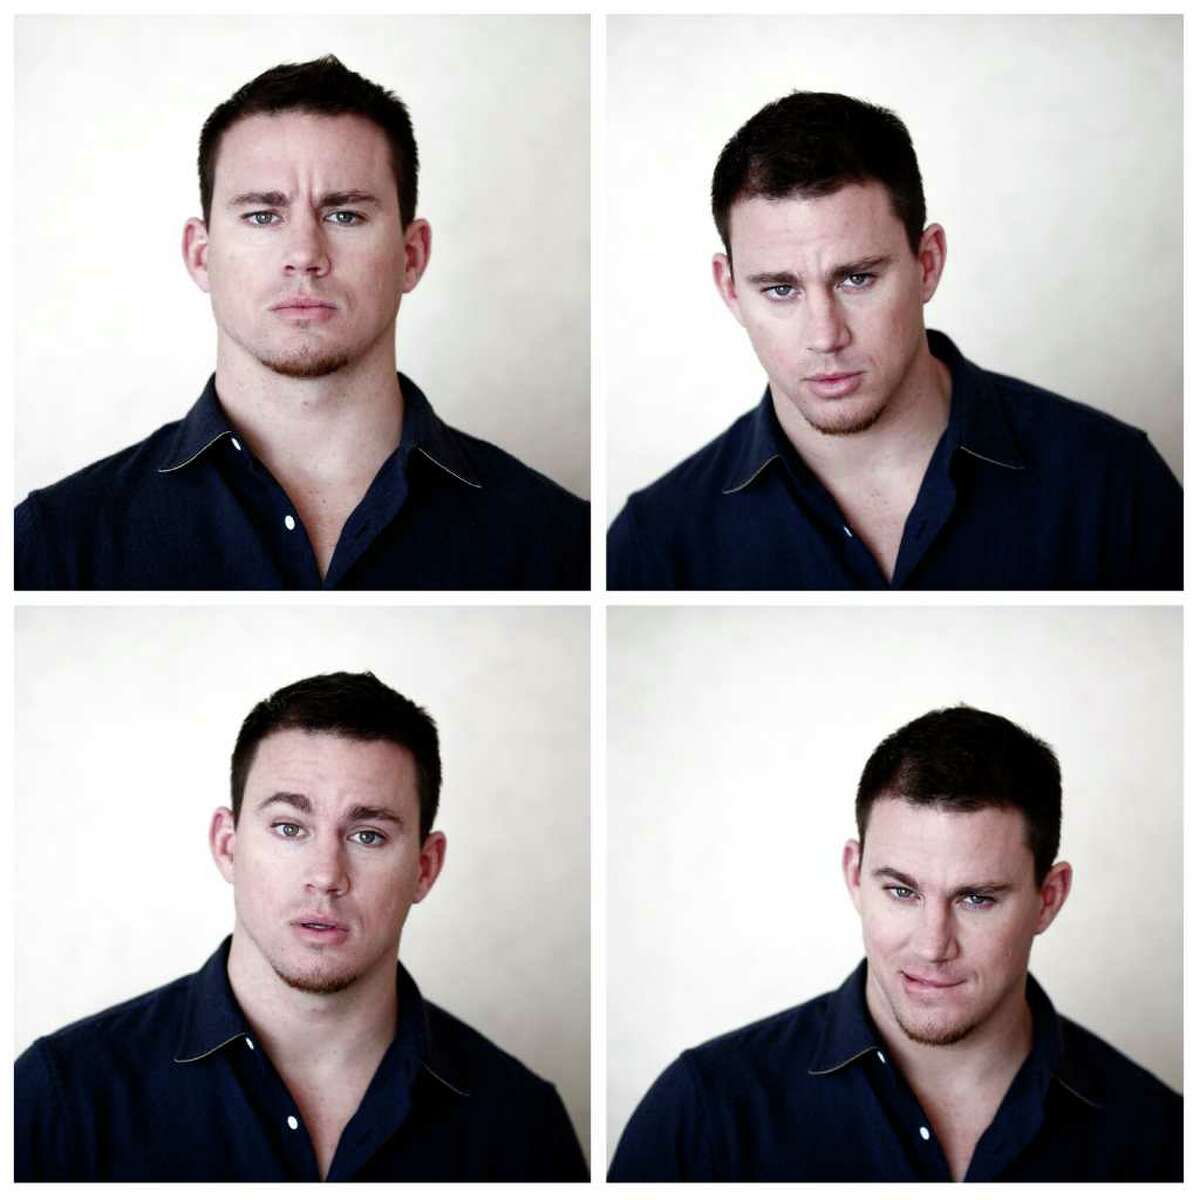 A combination photo of Actor Channing Tatum at the Ritz Carlton in Washington, Feb. 29, 2012. For over a decade, Hollywood has failed to mint the kind of actor who can anchor a blockbuster and repeat that feat over a prolonged period, but Tatum, one of moviedomâÄôs best hopes for a new male superstar, is working almost nonstop to become the new heavyweight. (Luke Sharrett/The New York Times) -- PHOTO MOVED IN ADVANCE AND NOT FOR USE - ONLINE OR IN PRINT - BEFORE MARCH 11, 2012. --